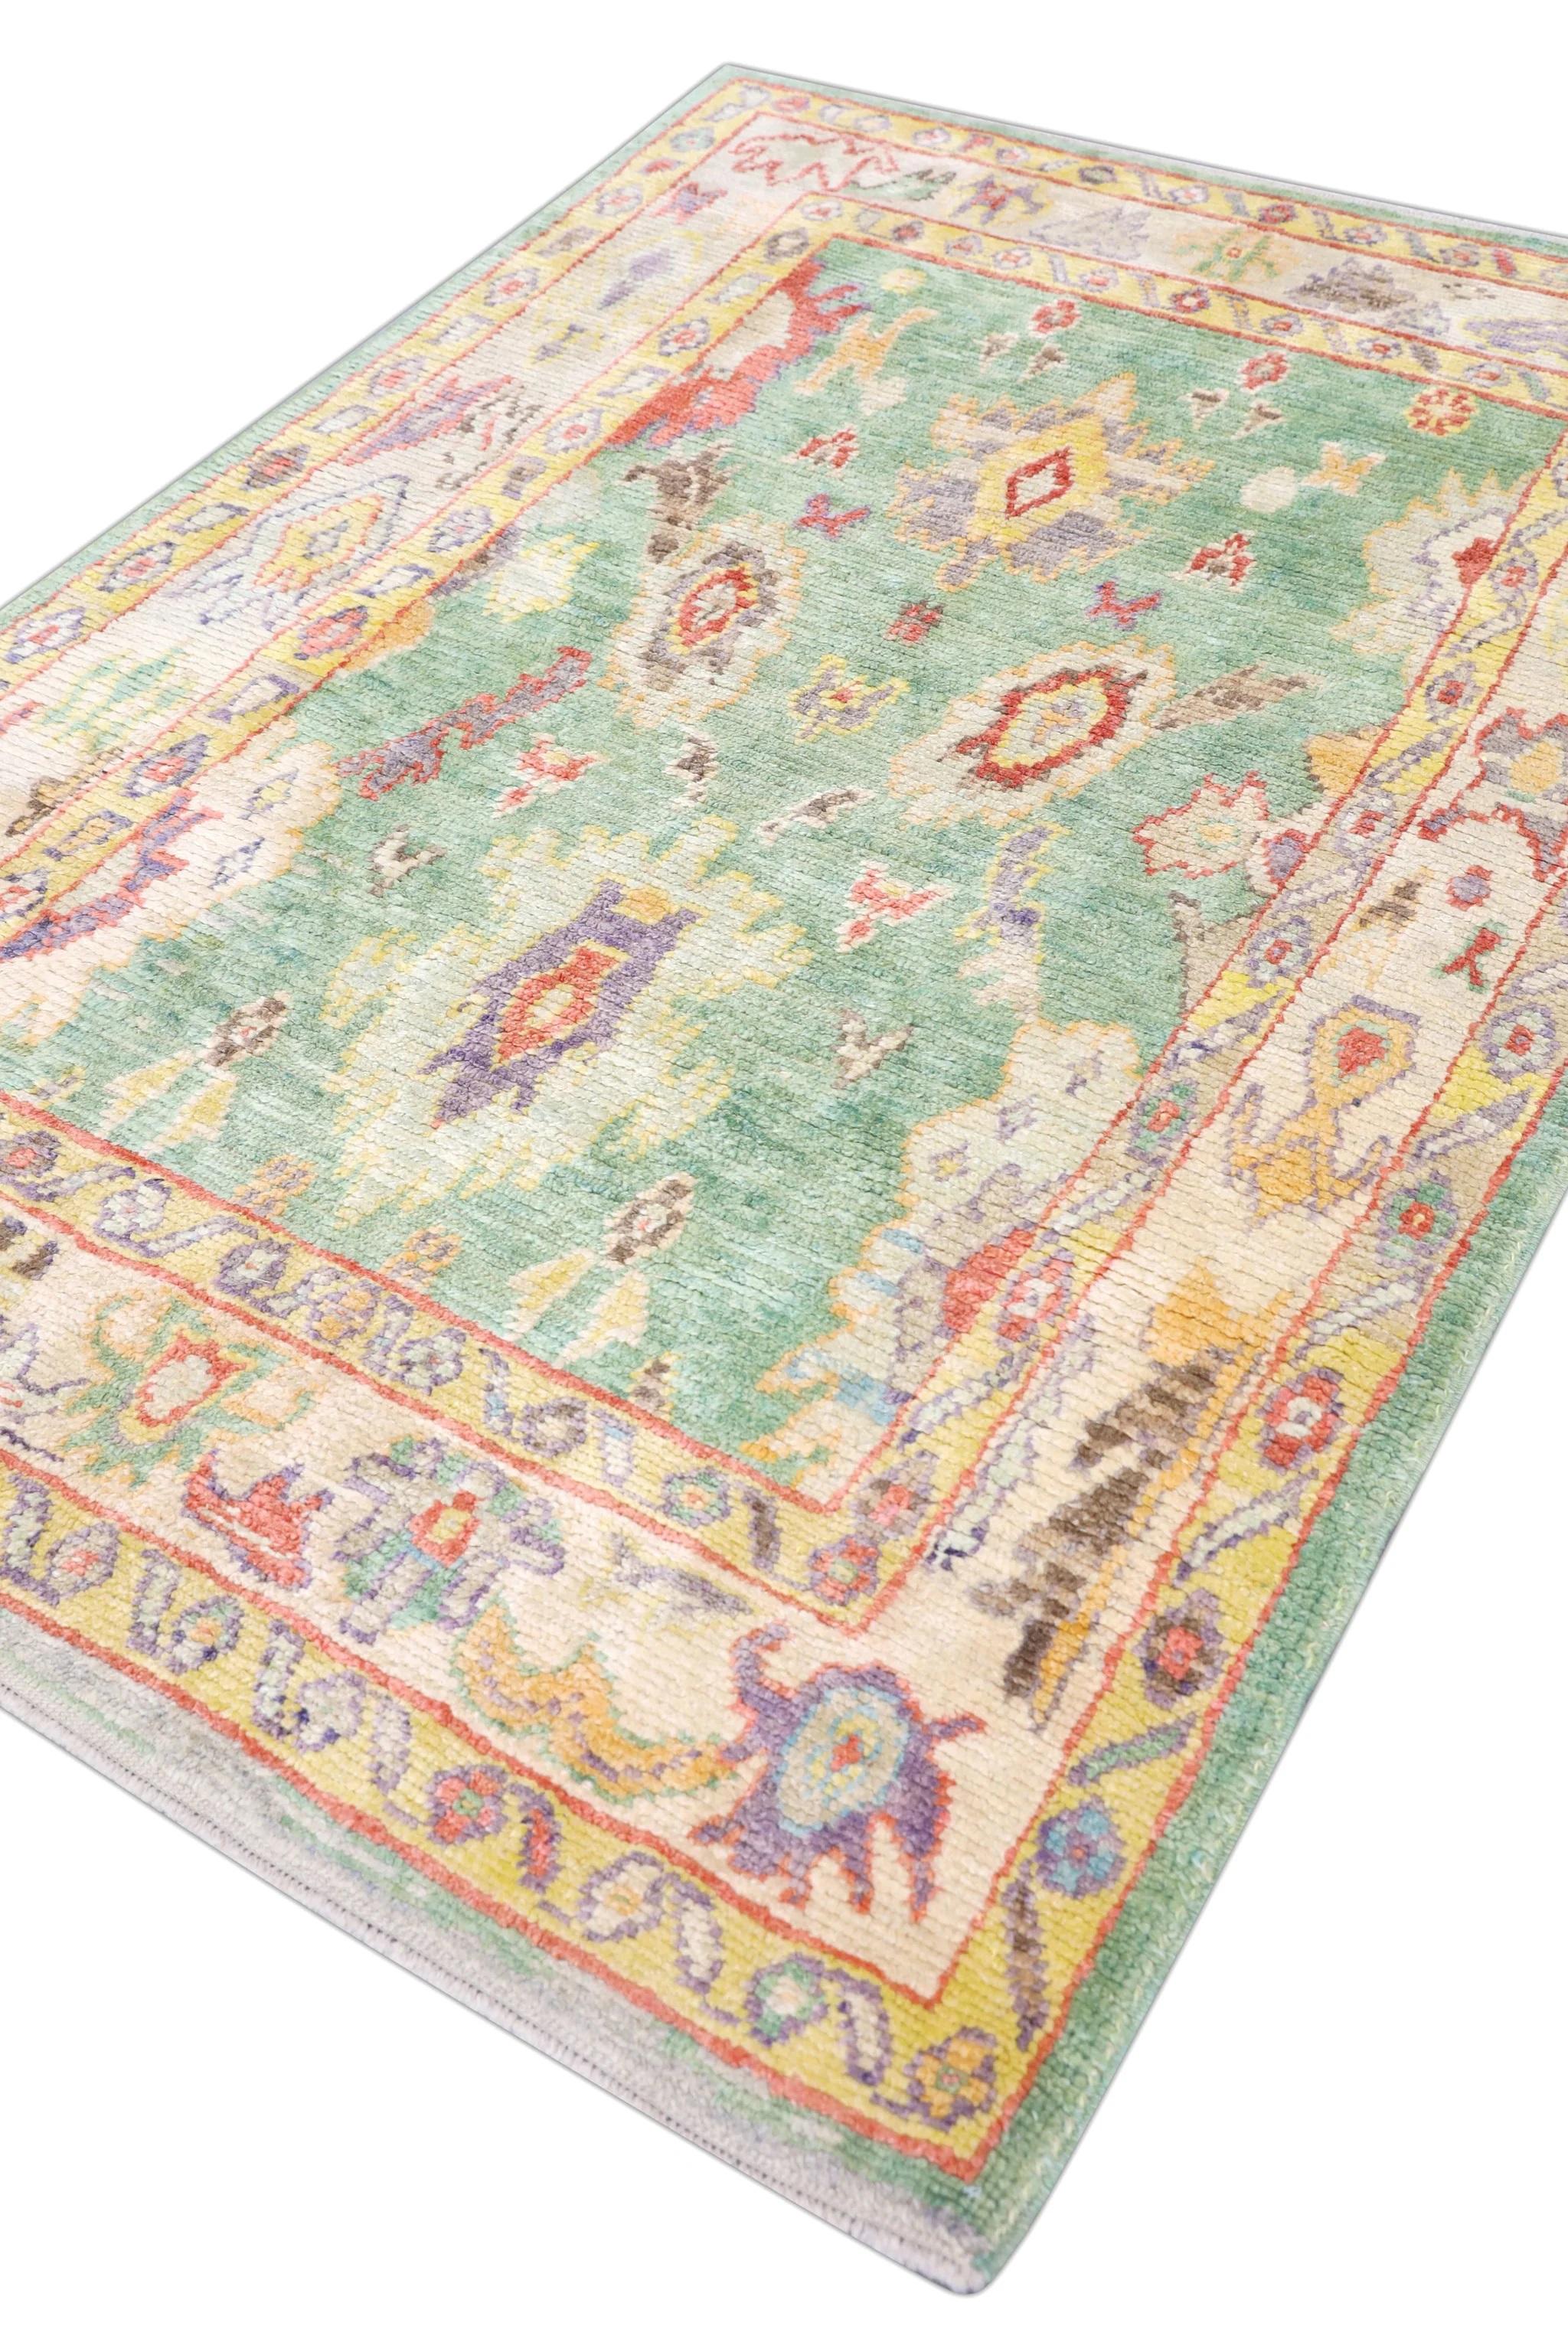 Green Handwoven Wool Turkish Oushak Rug with Colorful Floral Pattern 5'4